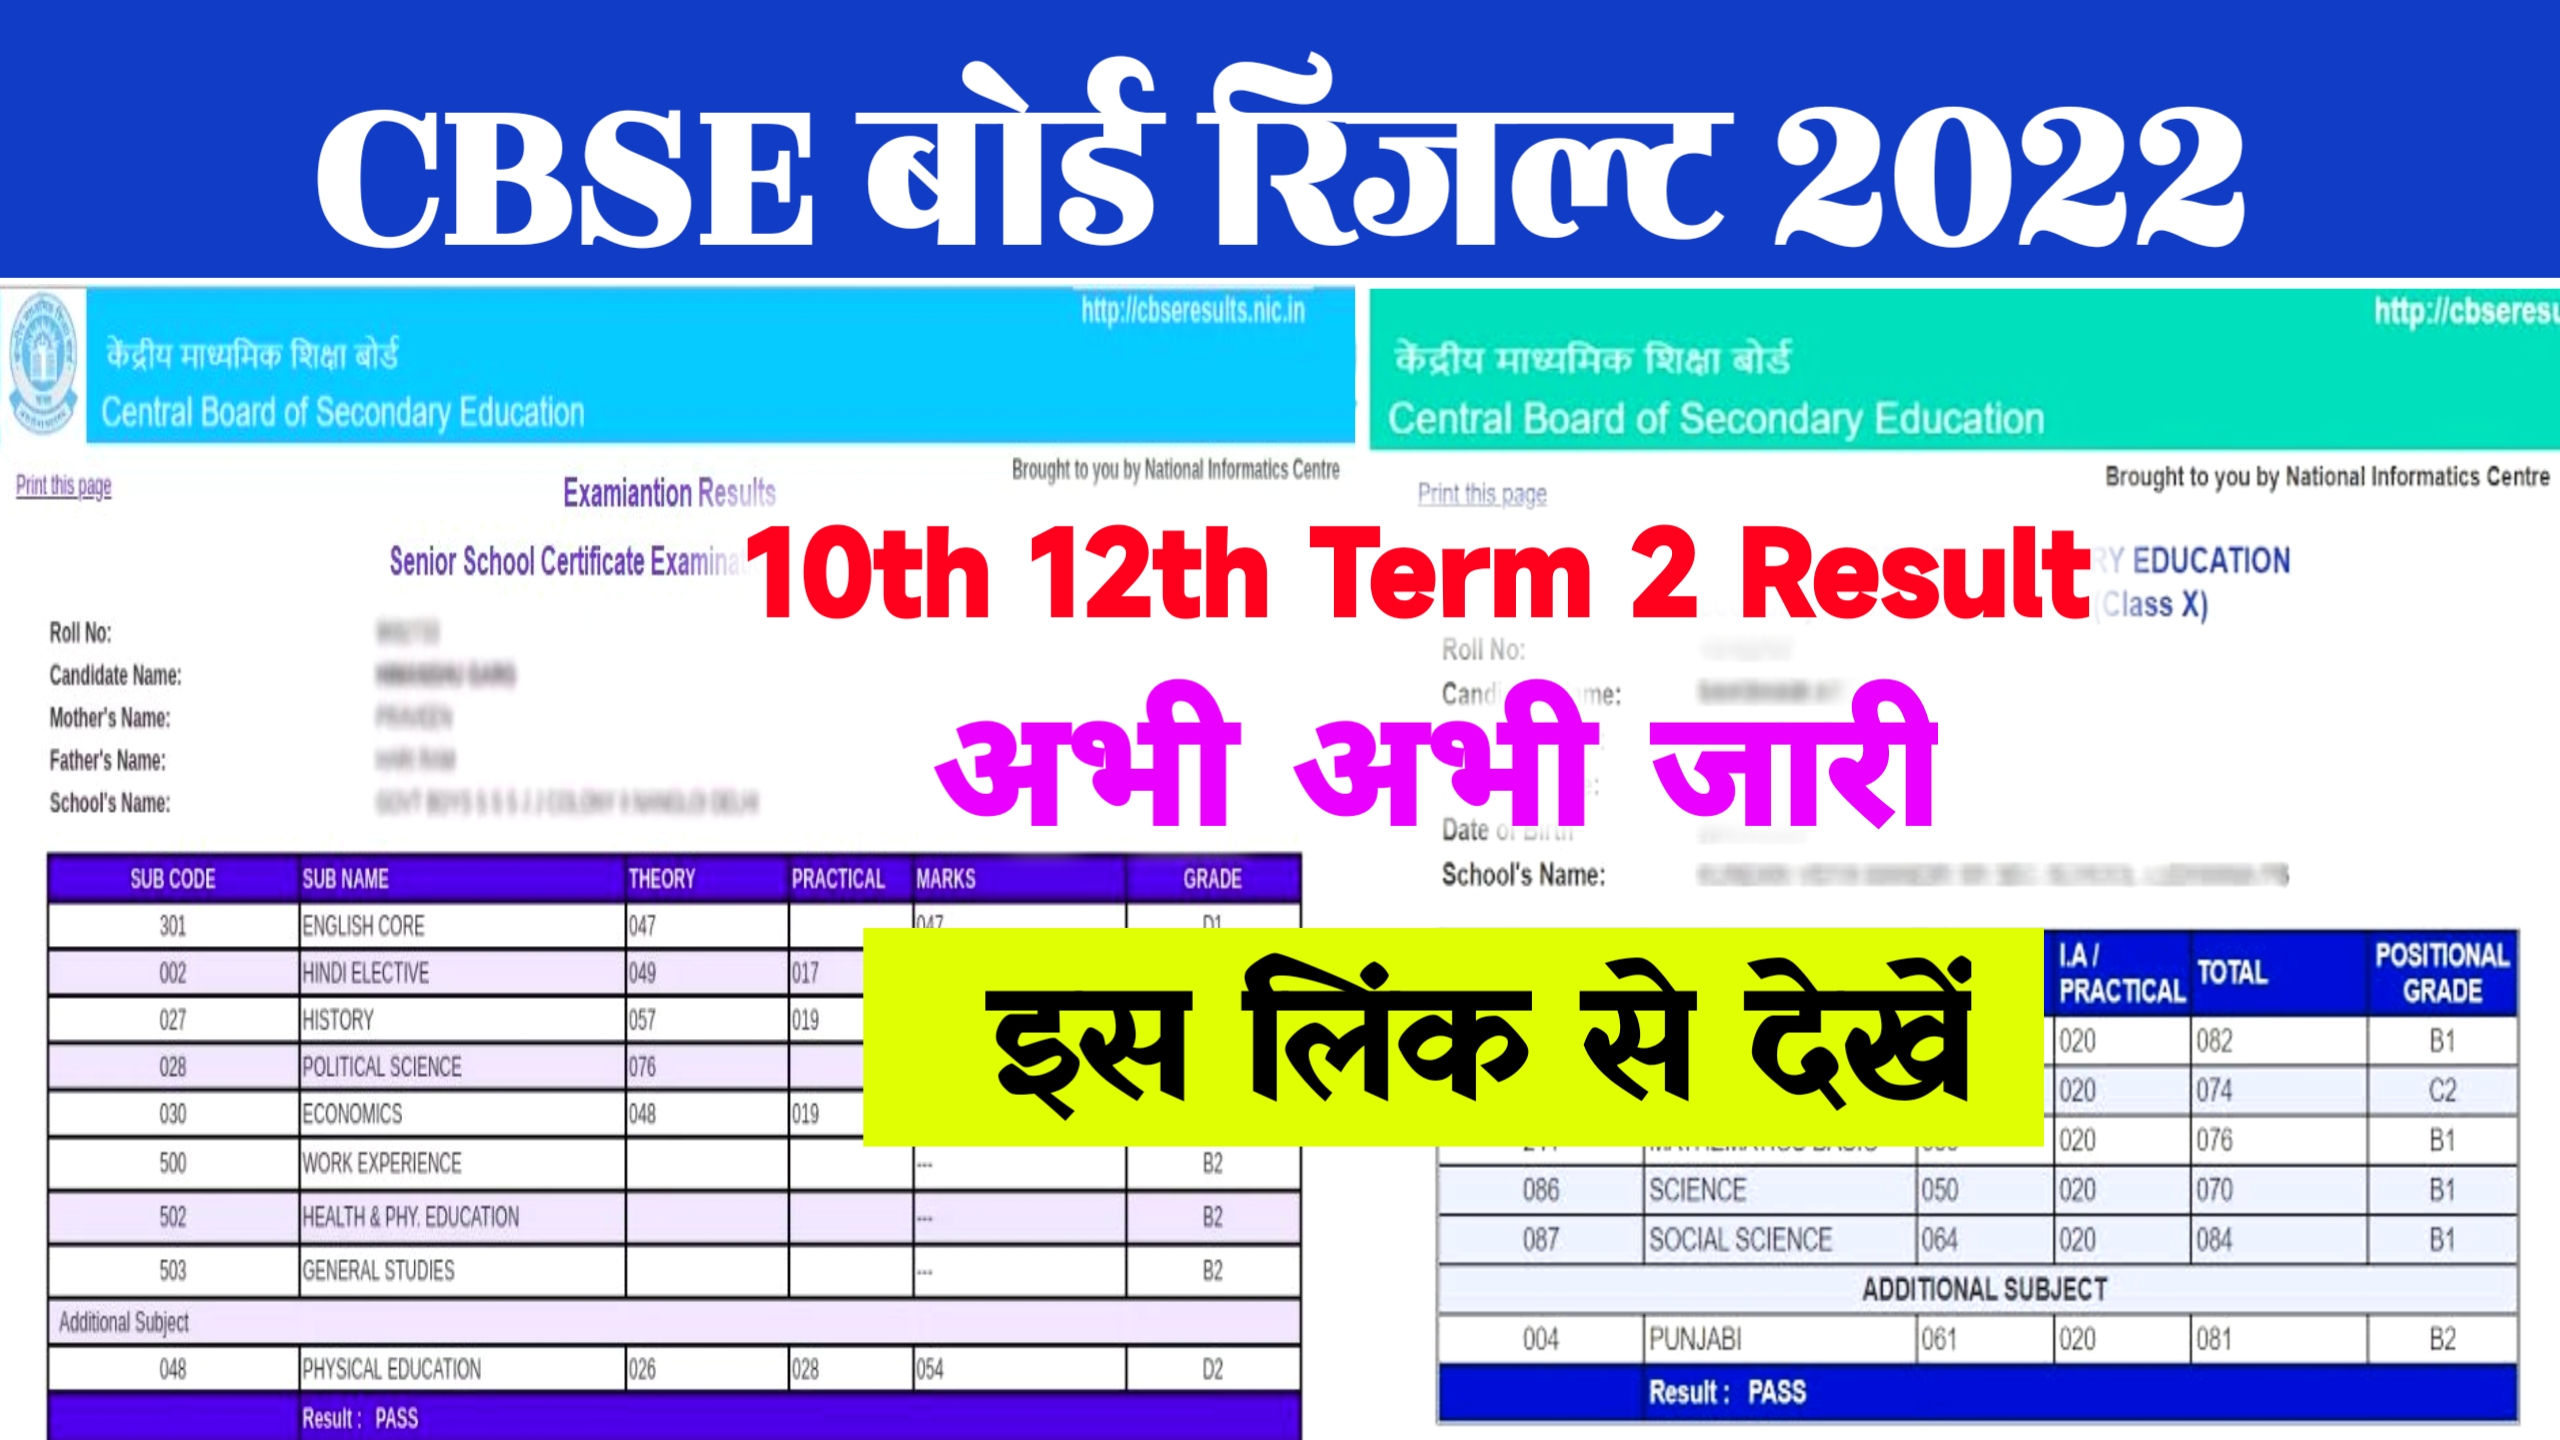 Cbse 10th 12th Result 2022 New Link ~ Term 2 Result Out @cbse.gov.in